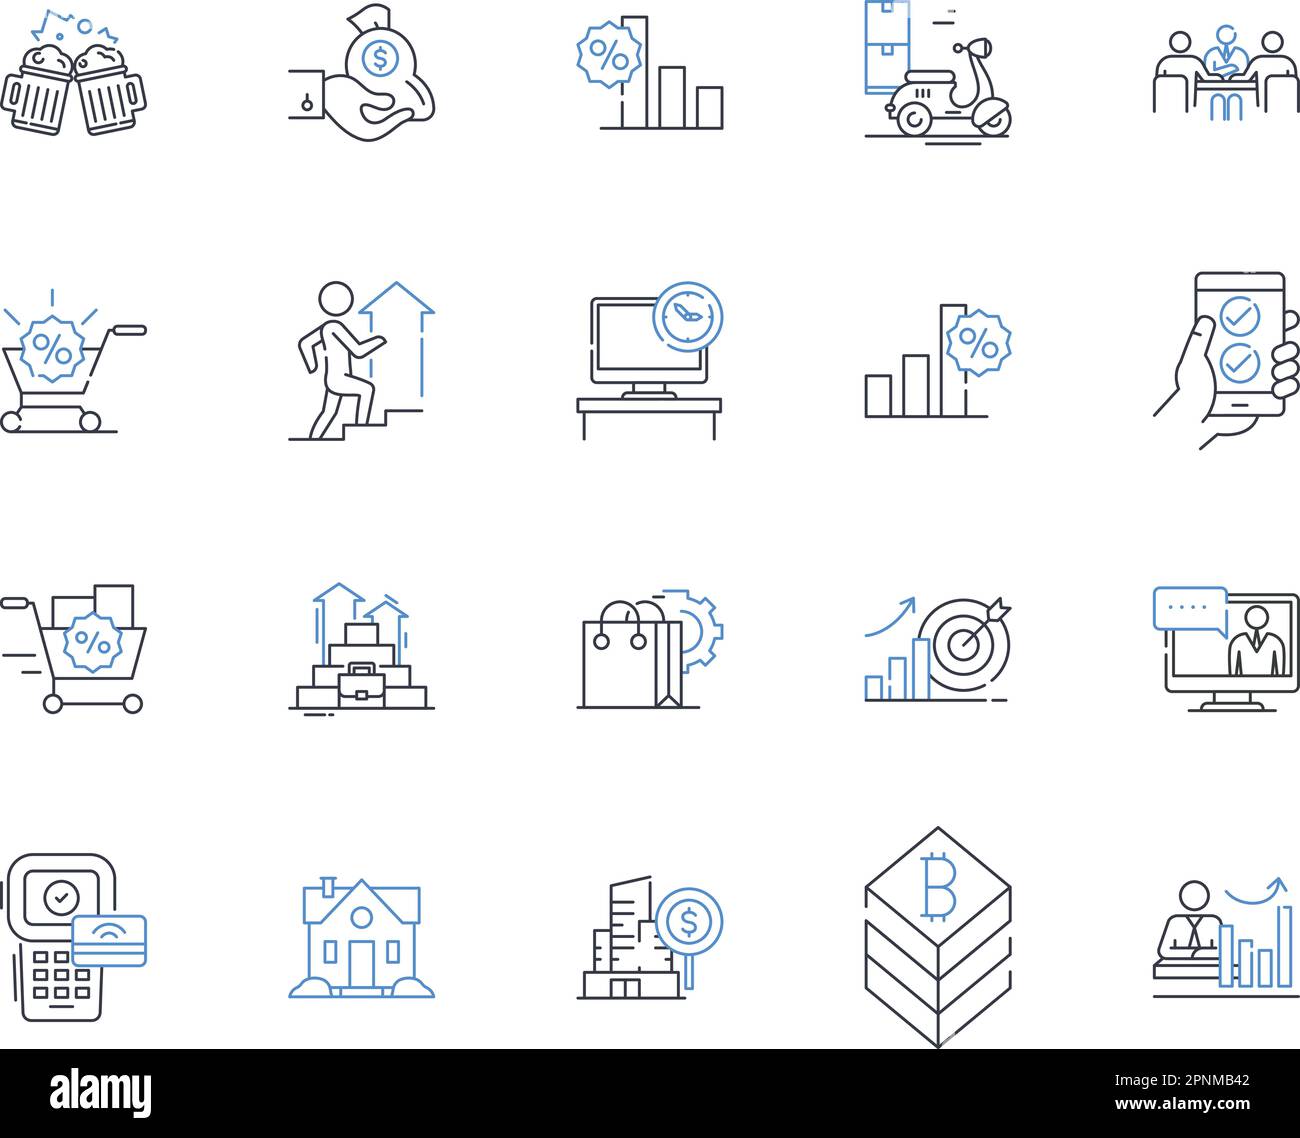 Selling and surplus line icons collection. Auctions, Clearance, Inventory, Liquidation, Merchandise, Overstock, Resale vector and linear illustration Stock Vector